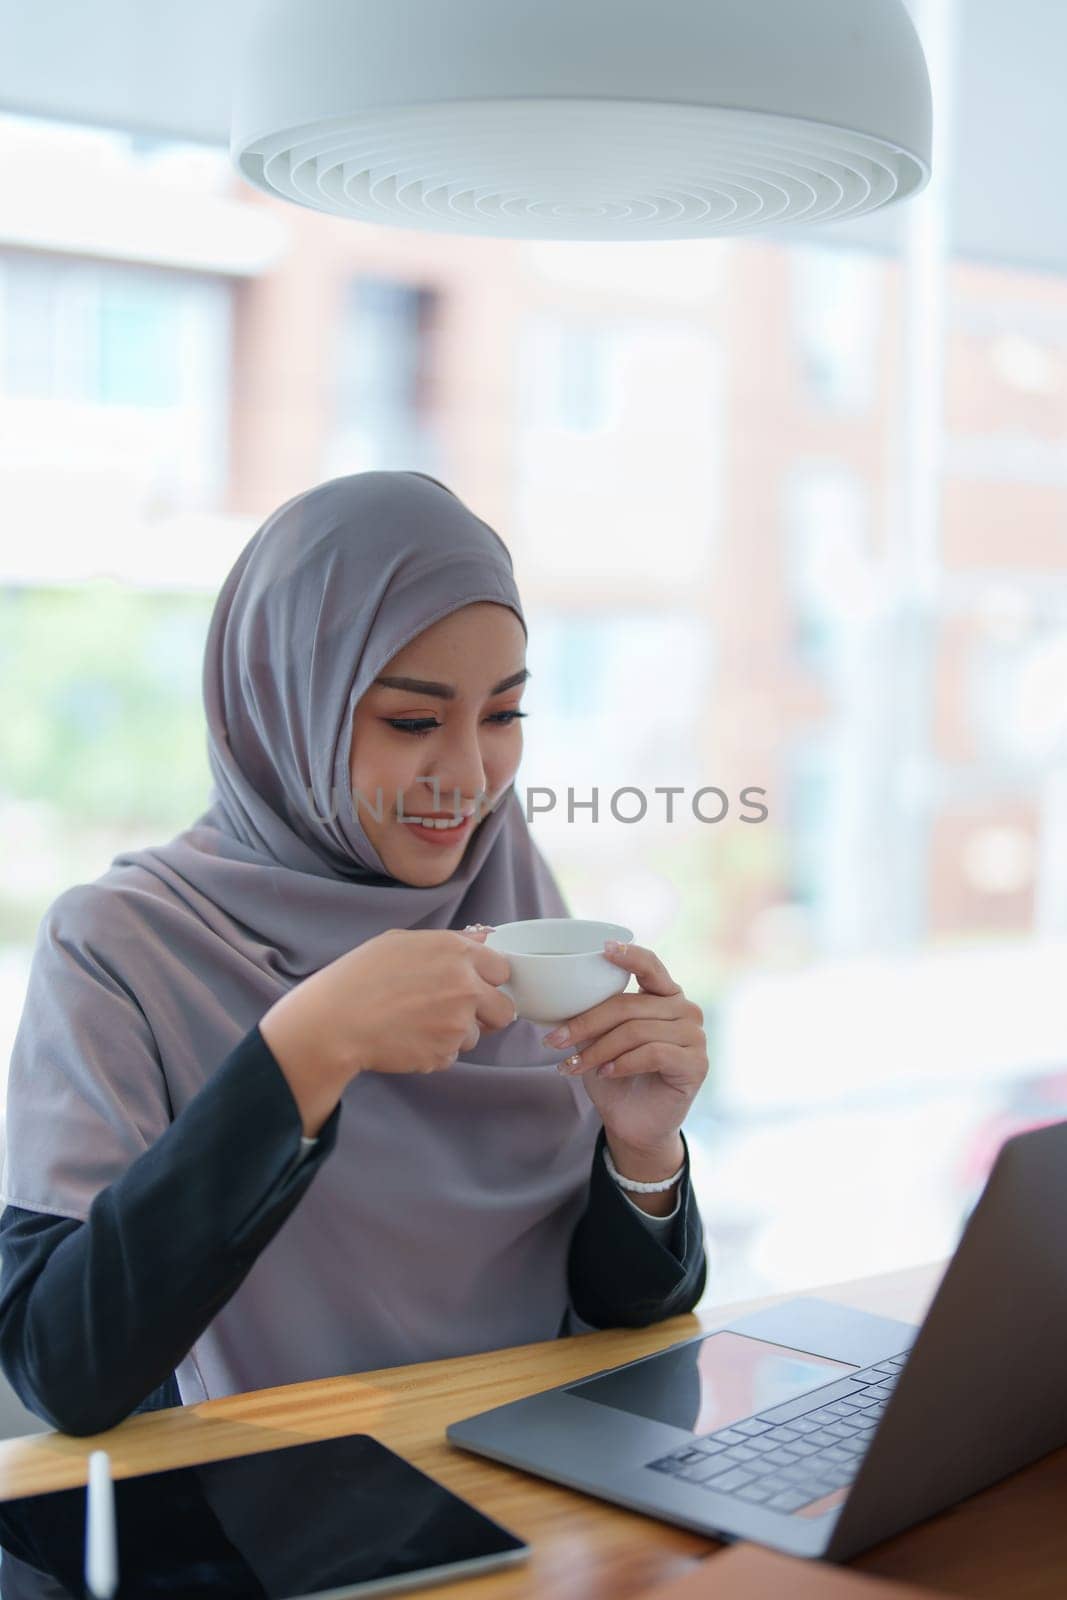 A beautiful Muslim woman with a smiling face in the morning drinking coffee and using a computer.